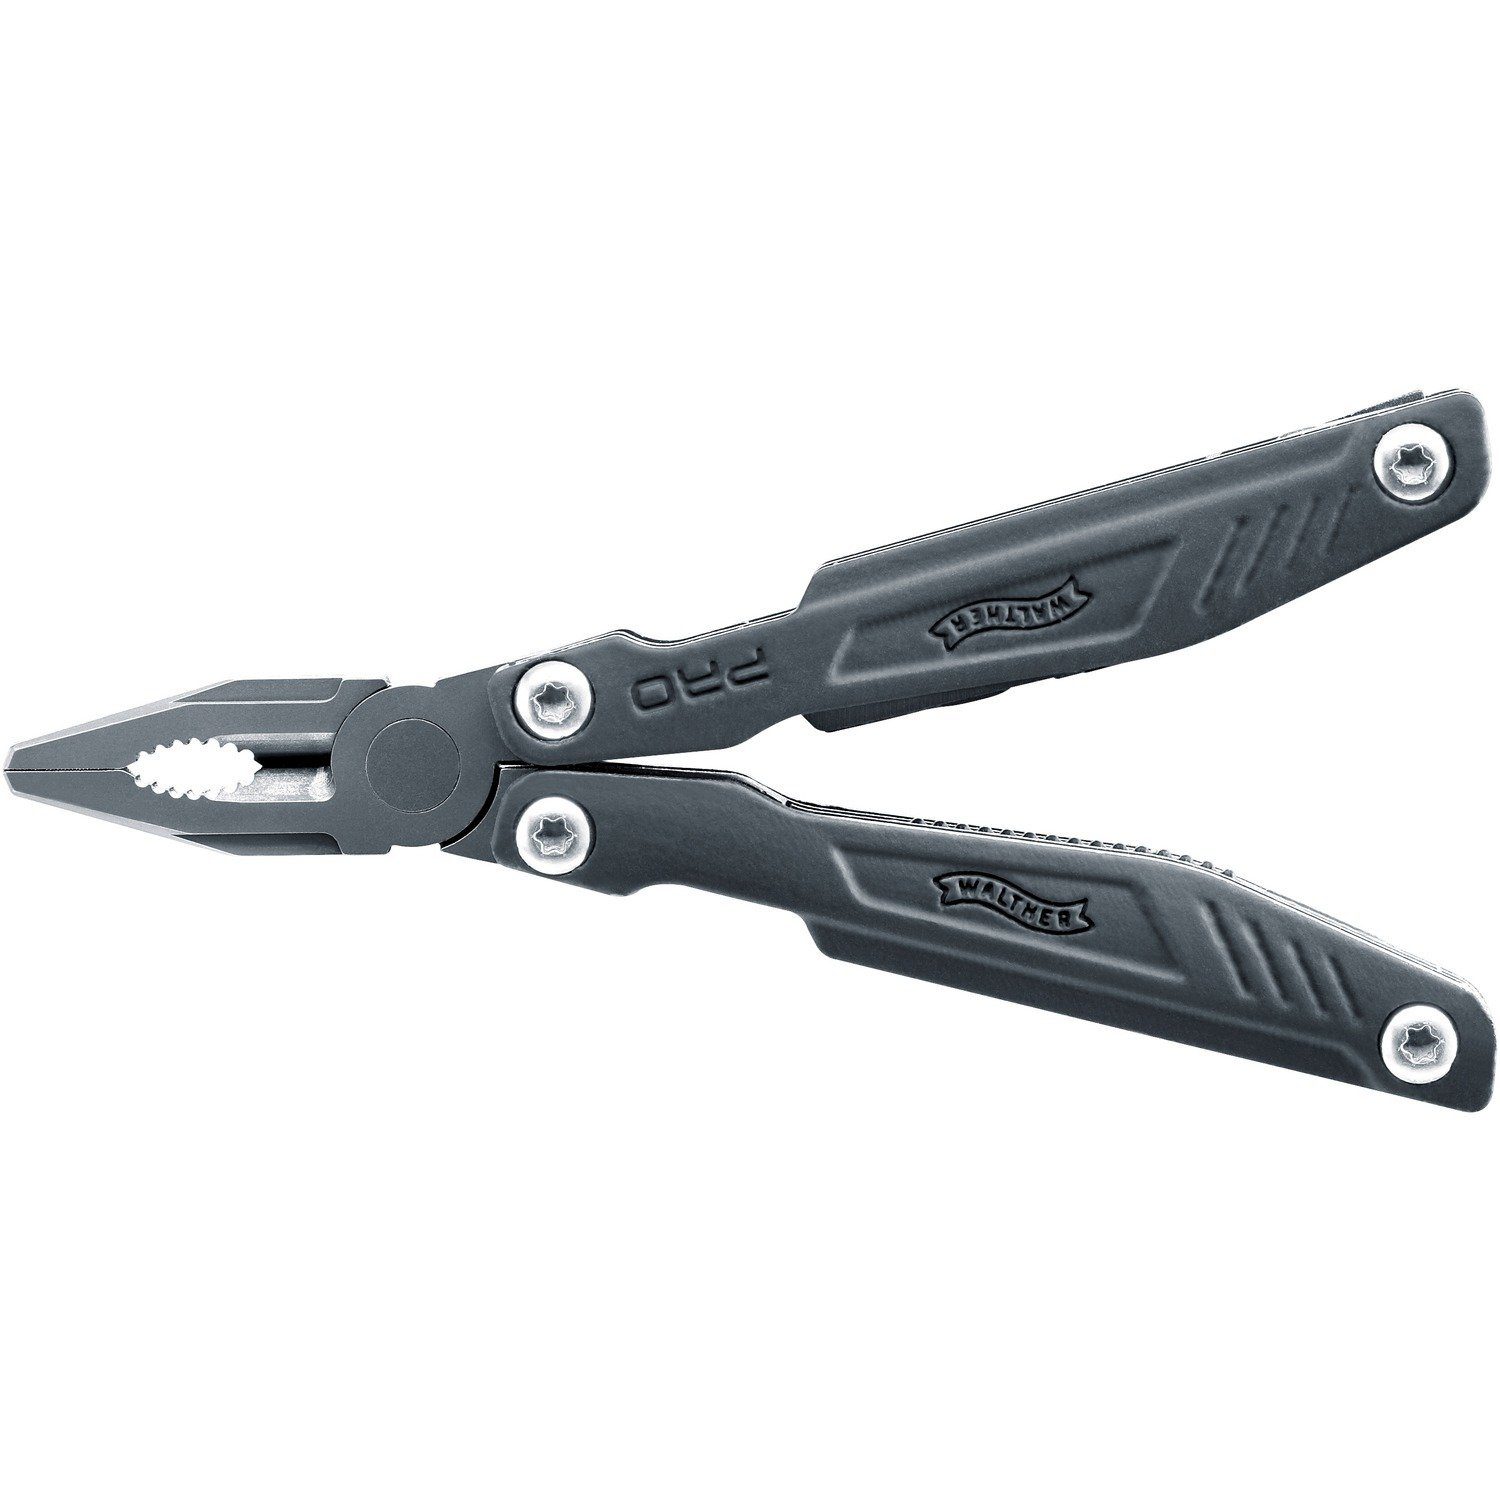 Tooltac Pro Multitool Walther S Multitool